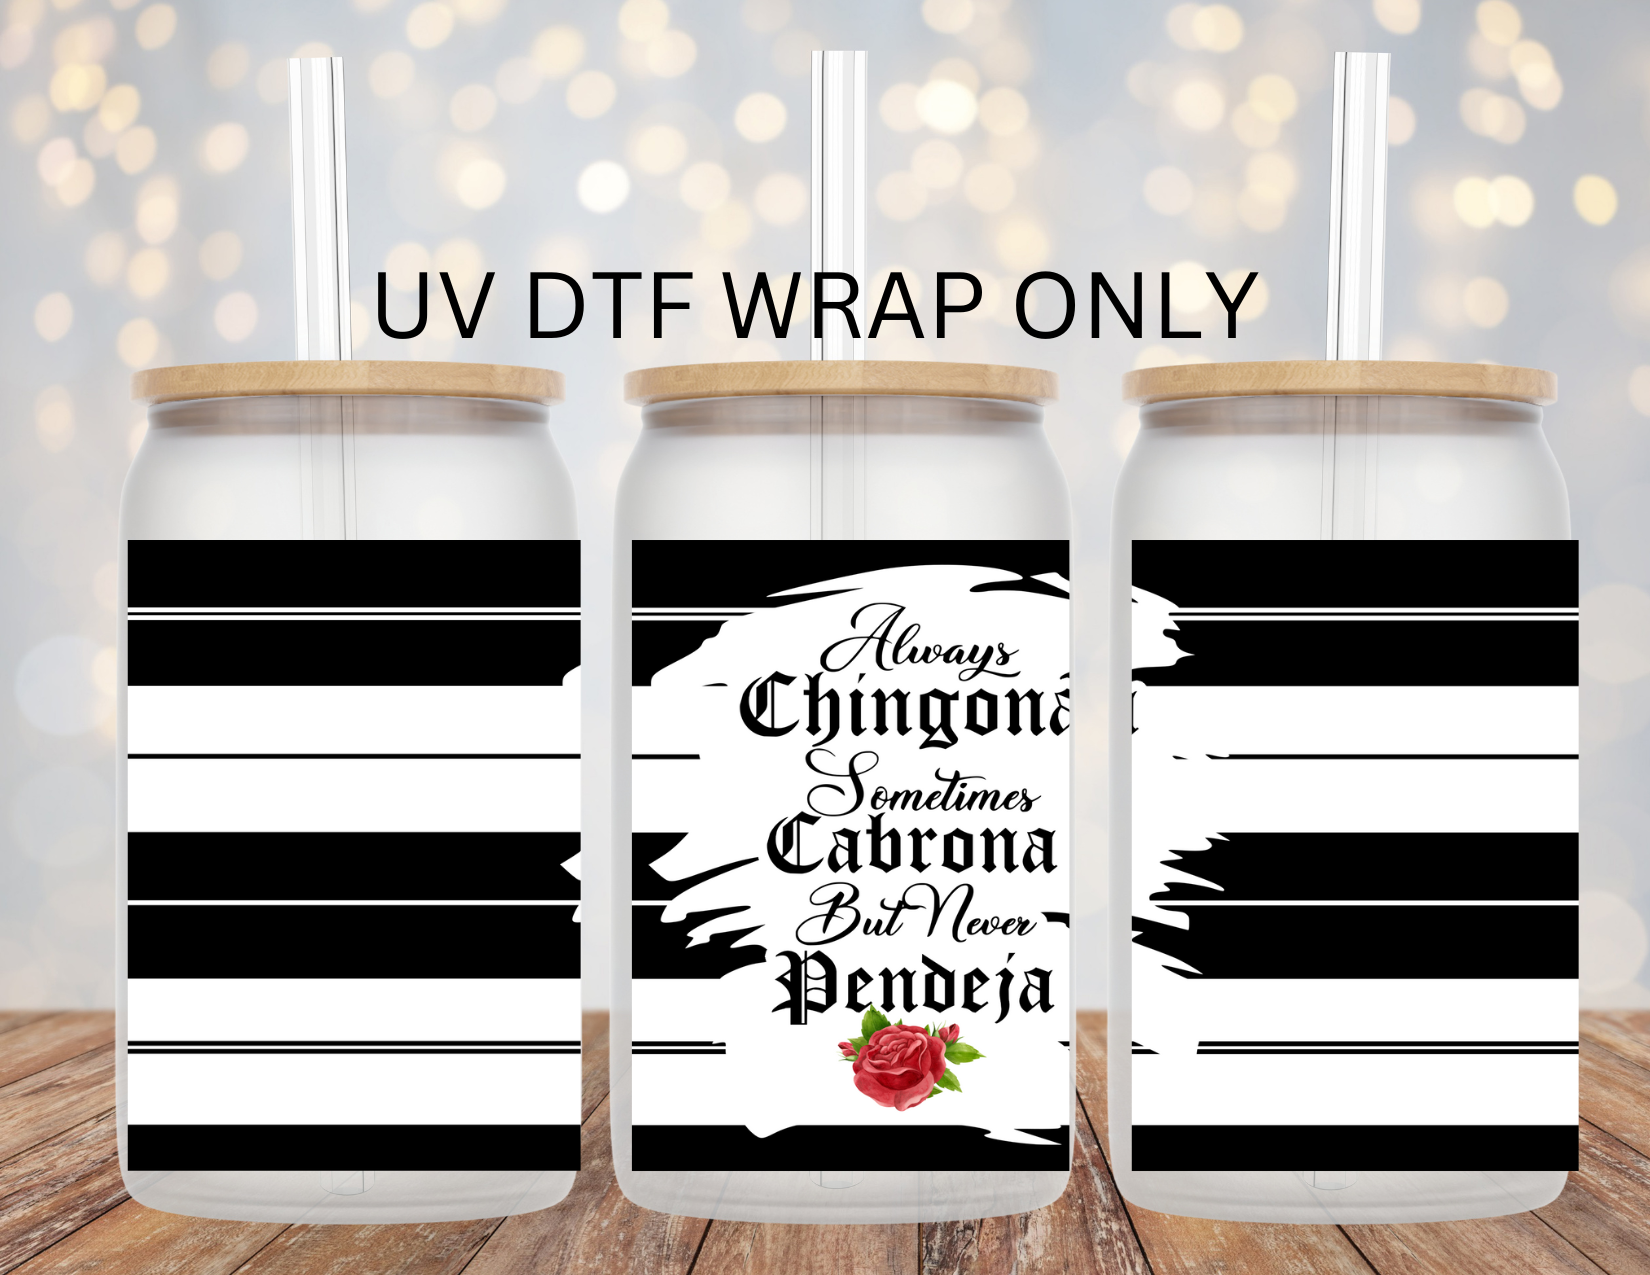 Football Uv Dtf Cup Wrap Sports Cup Wrap Football Uv Dtf -  in